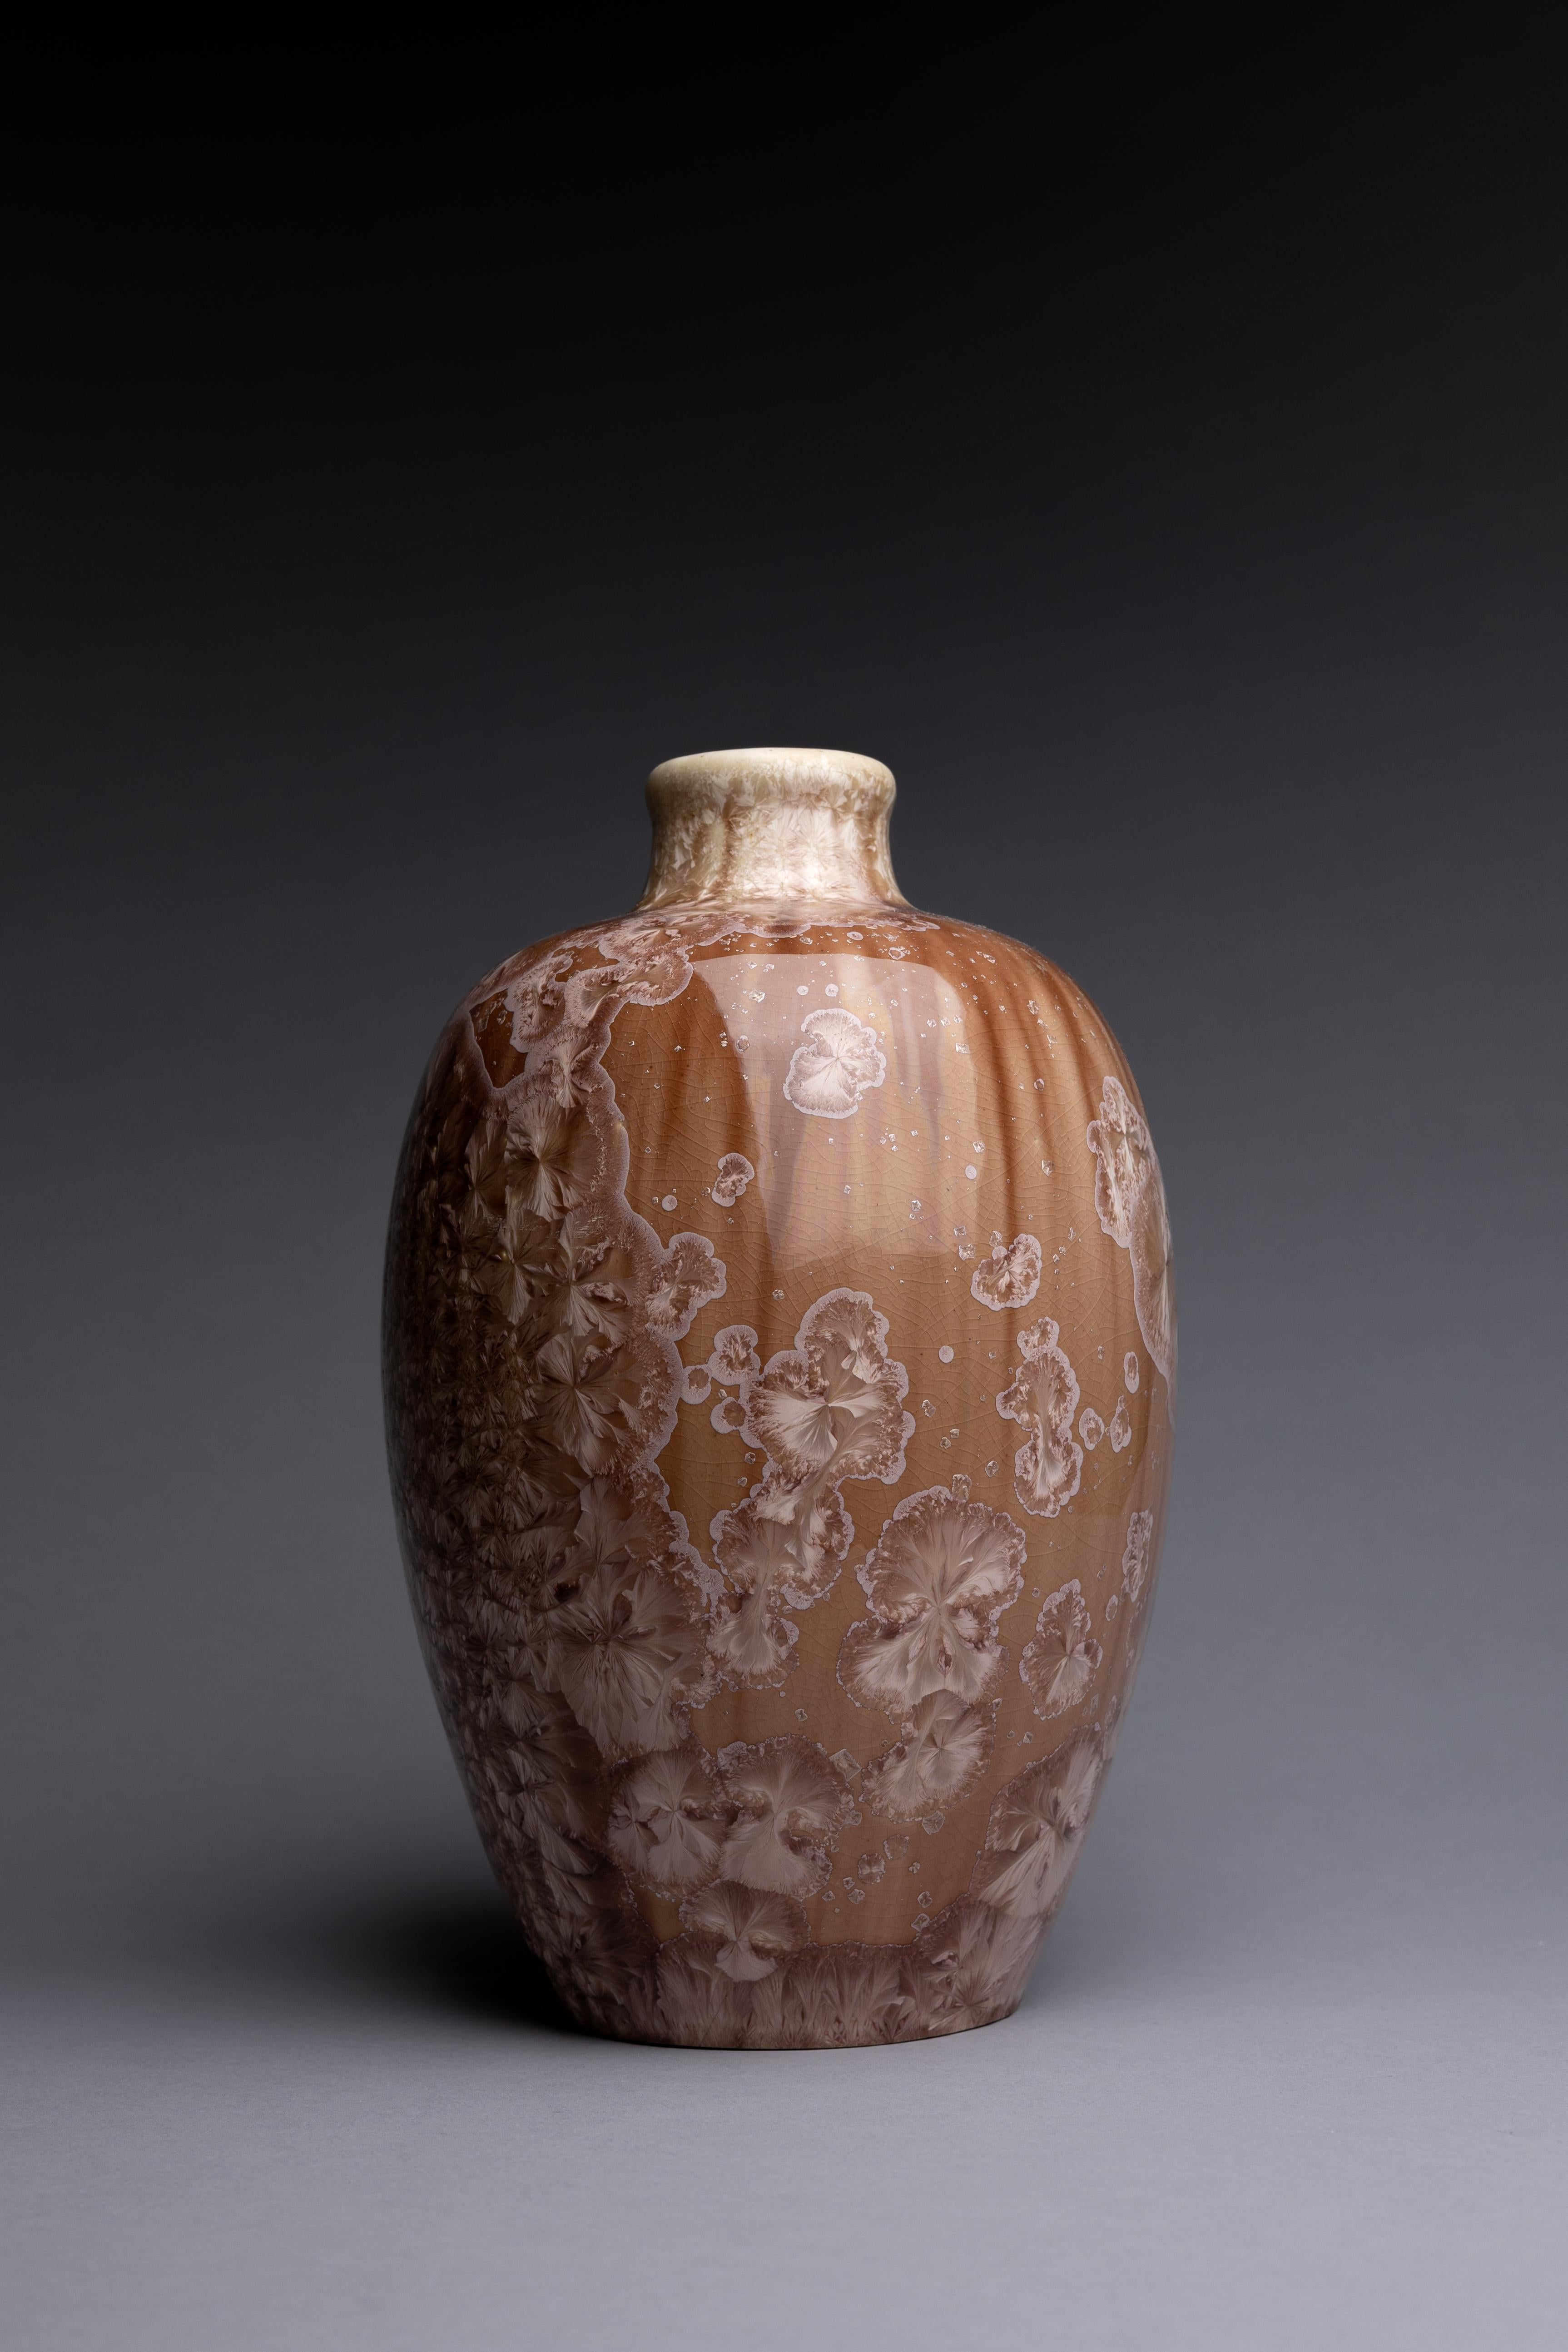 A crystalline-glazed porcelain vase, produced by the Mougin brothers circa 1910.

A sumptuous crystalline glaze covers this porcelain vase, made by the Frères Mougin around 1910. After studying ceramic techniques at Sèvres, Joseph Mougin joined